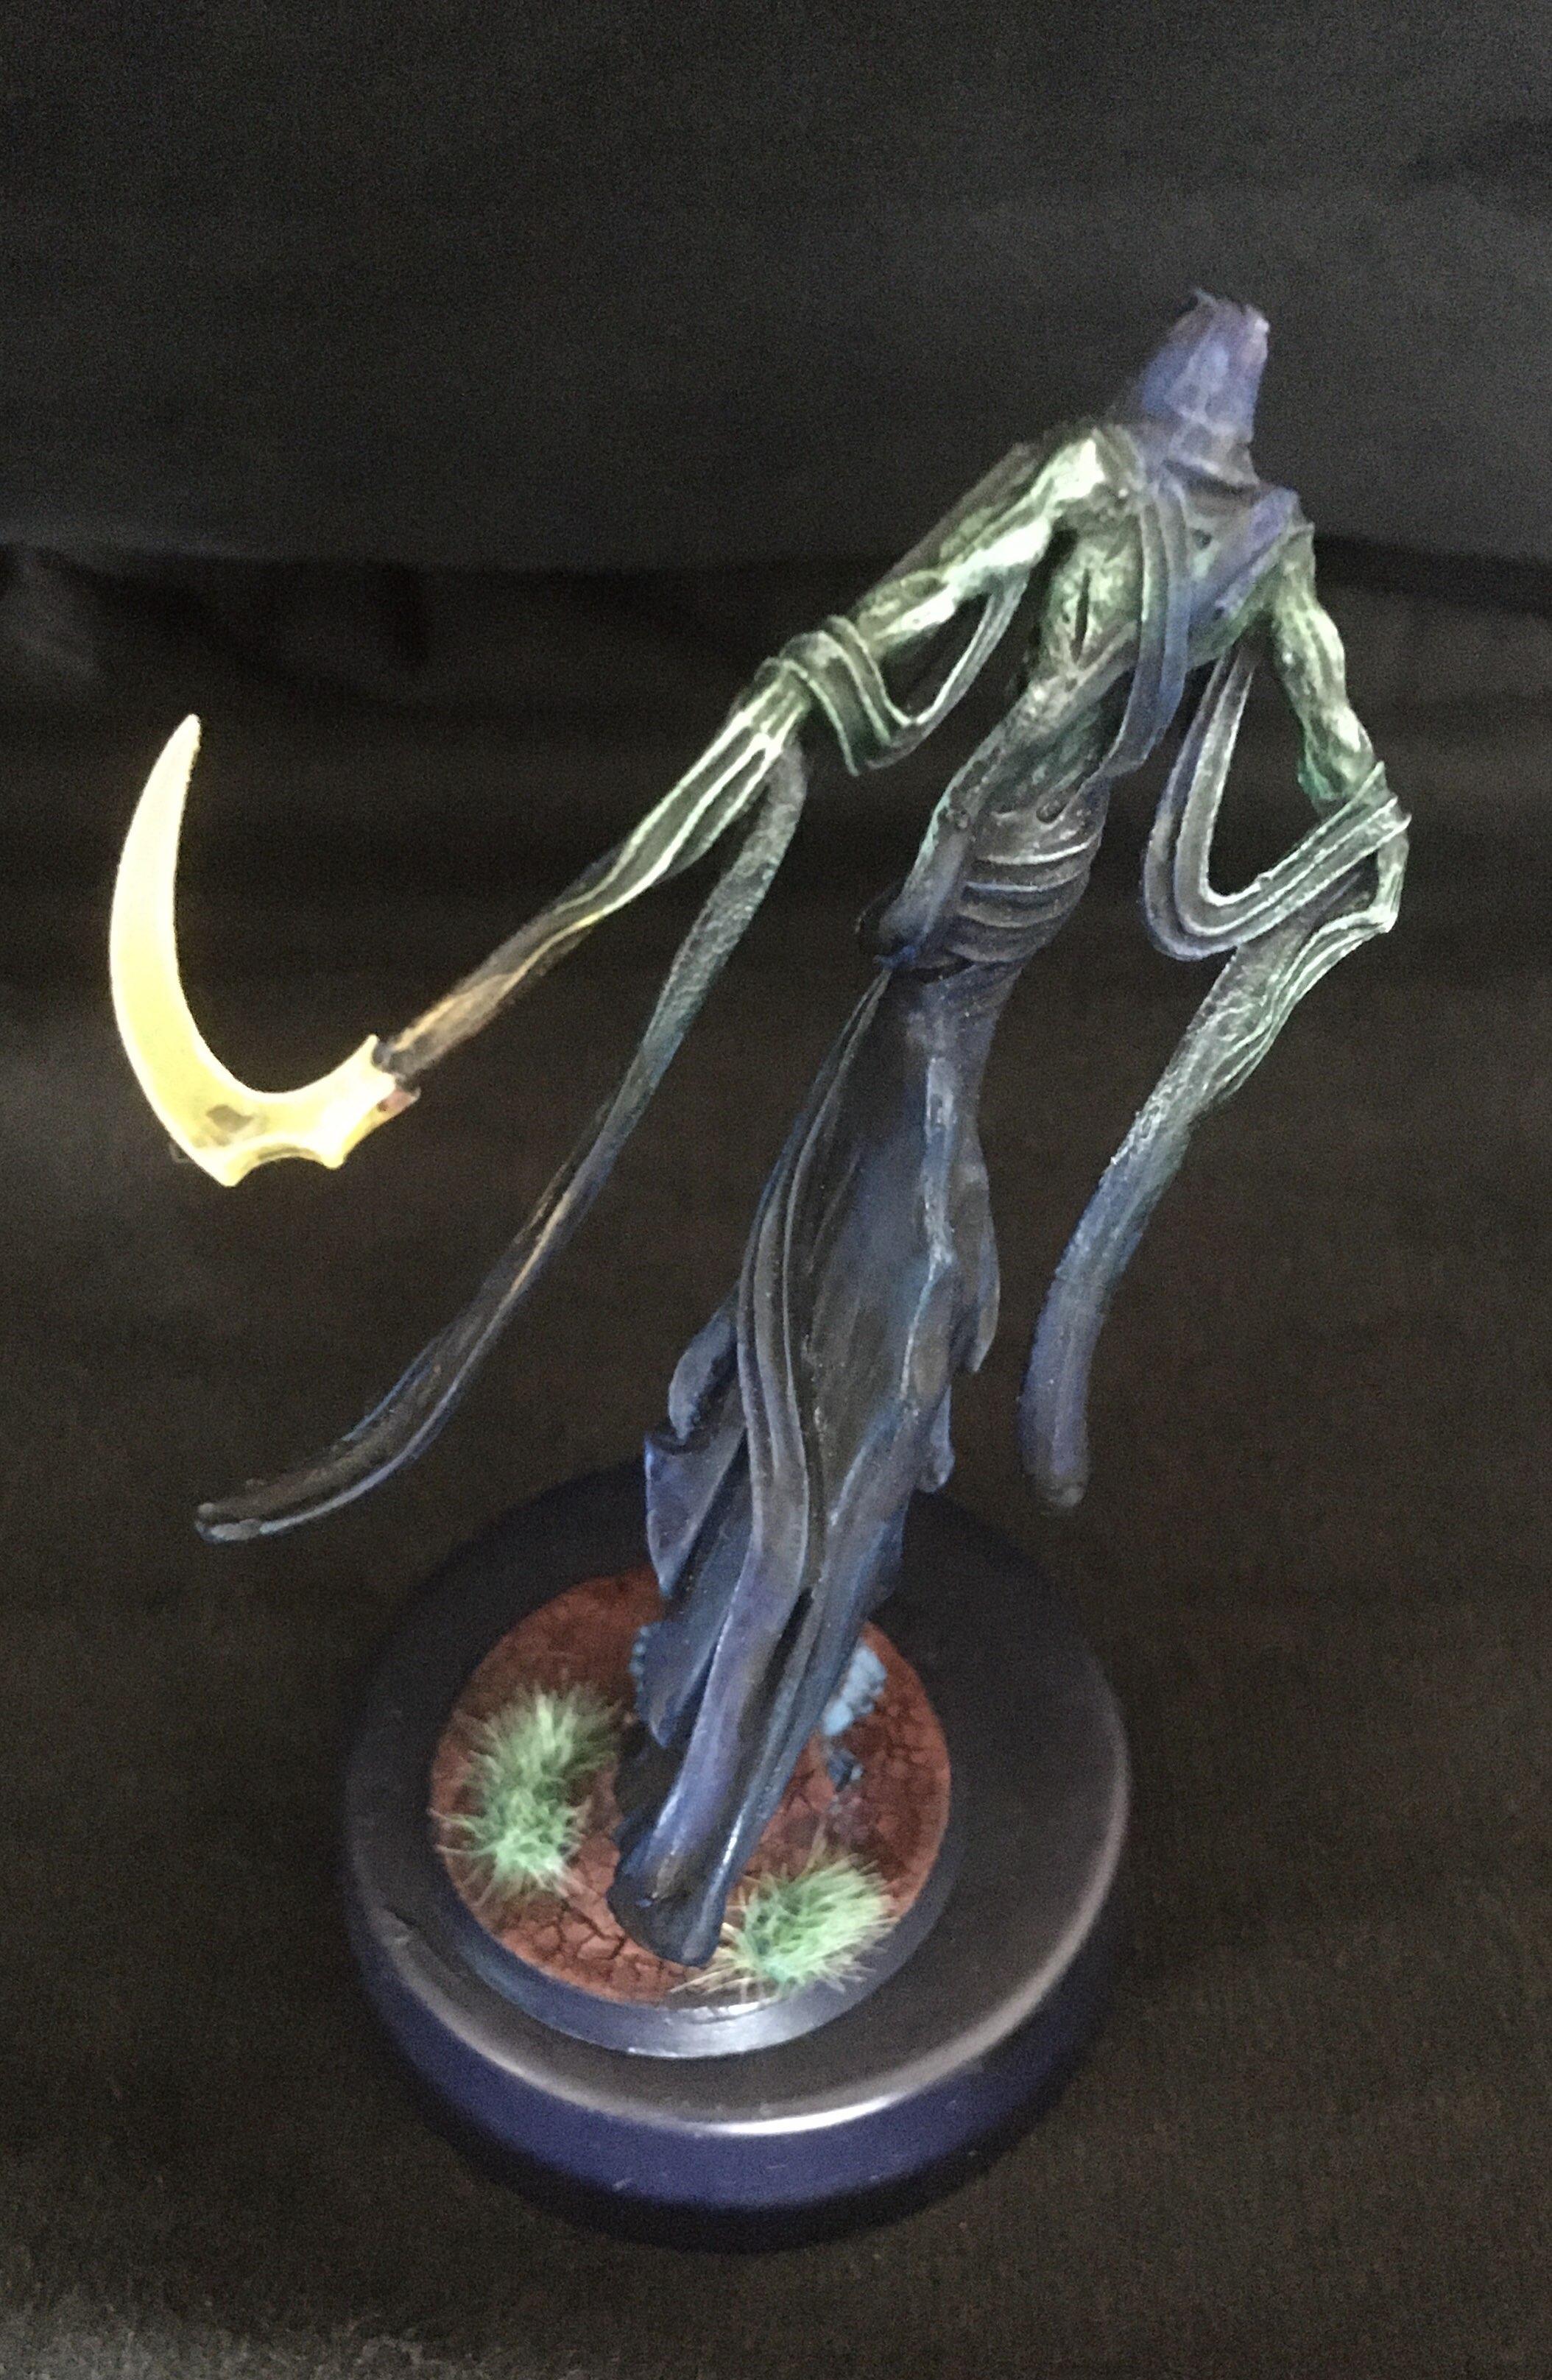 Nightbringer for April 21 Painting Competition